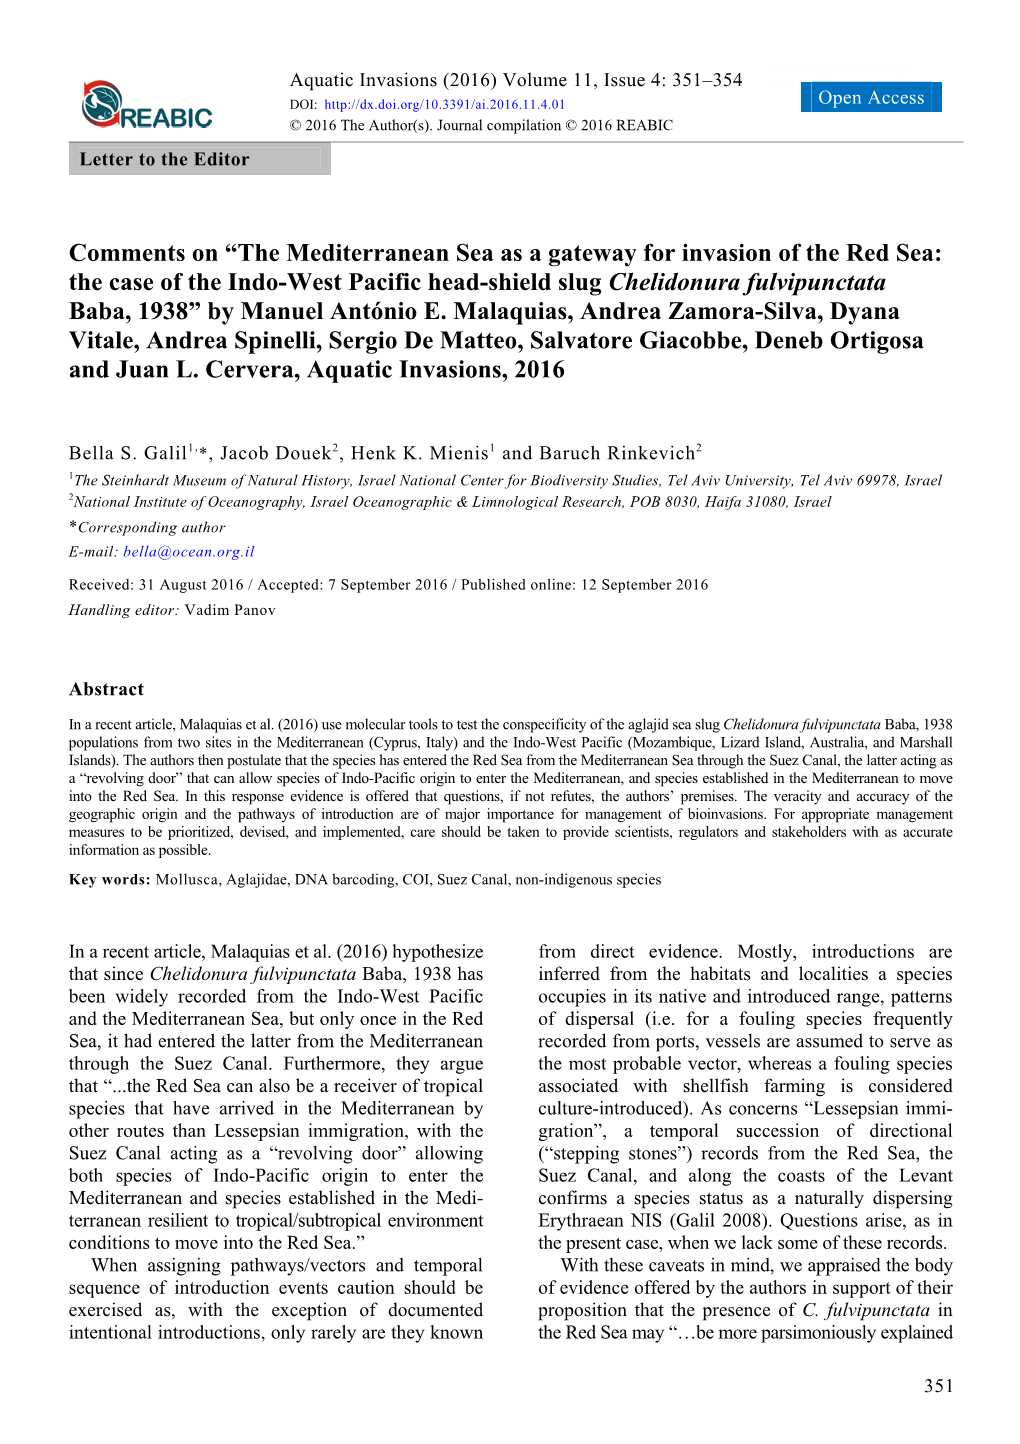 The Mediterranean Sea As a Gateway for Invasion of the Red Sea: The